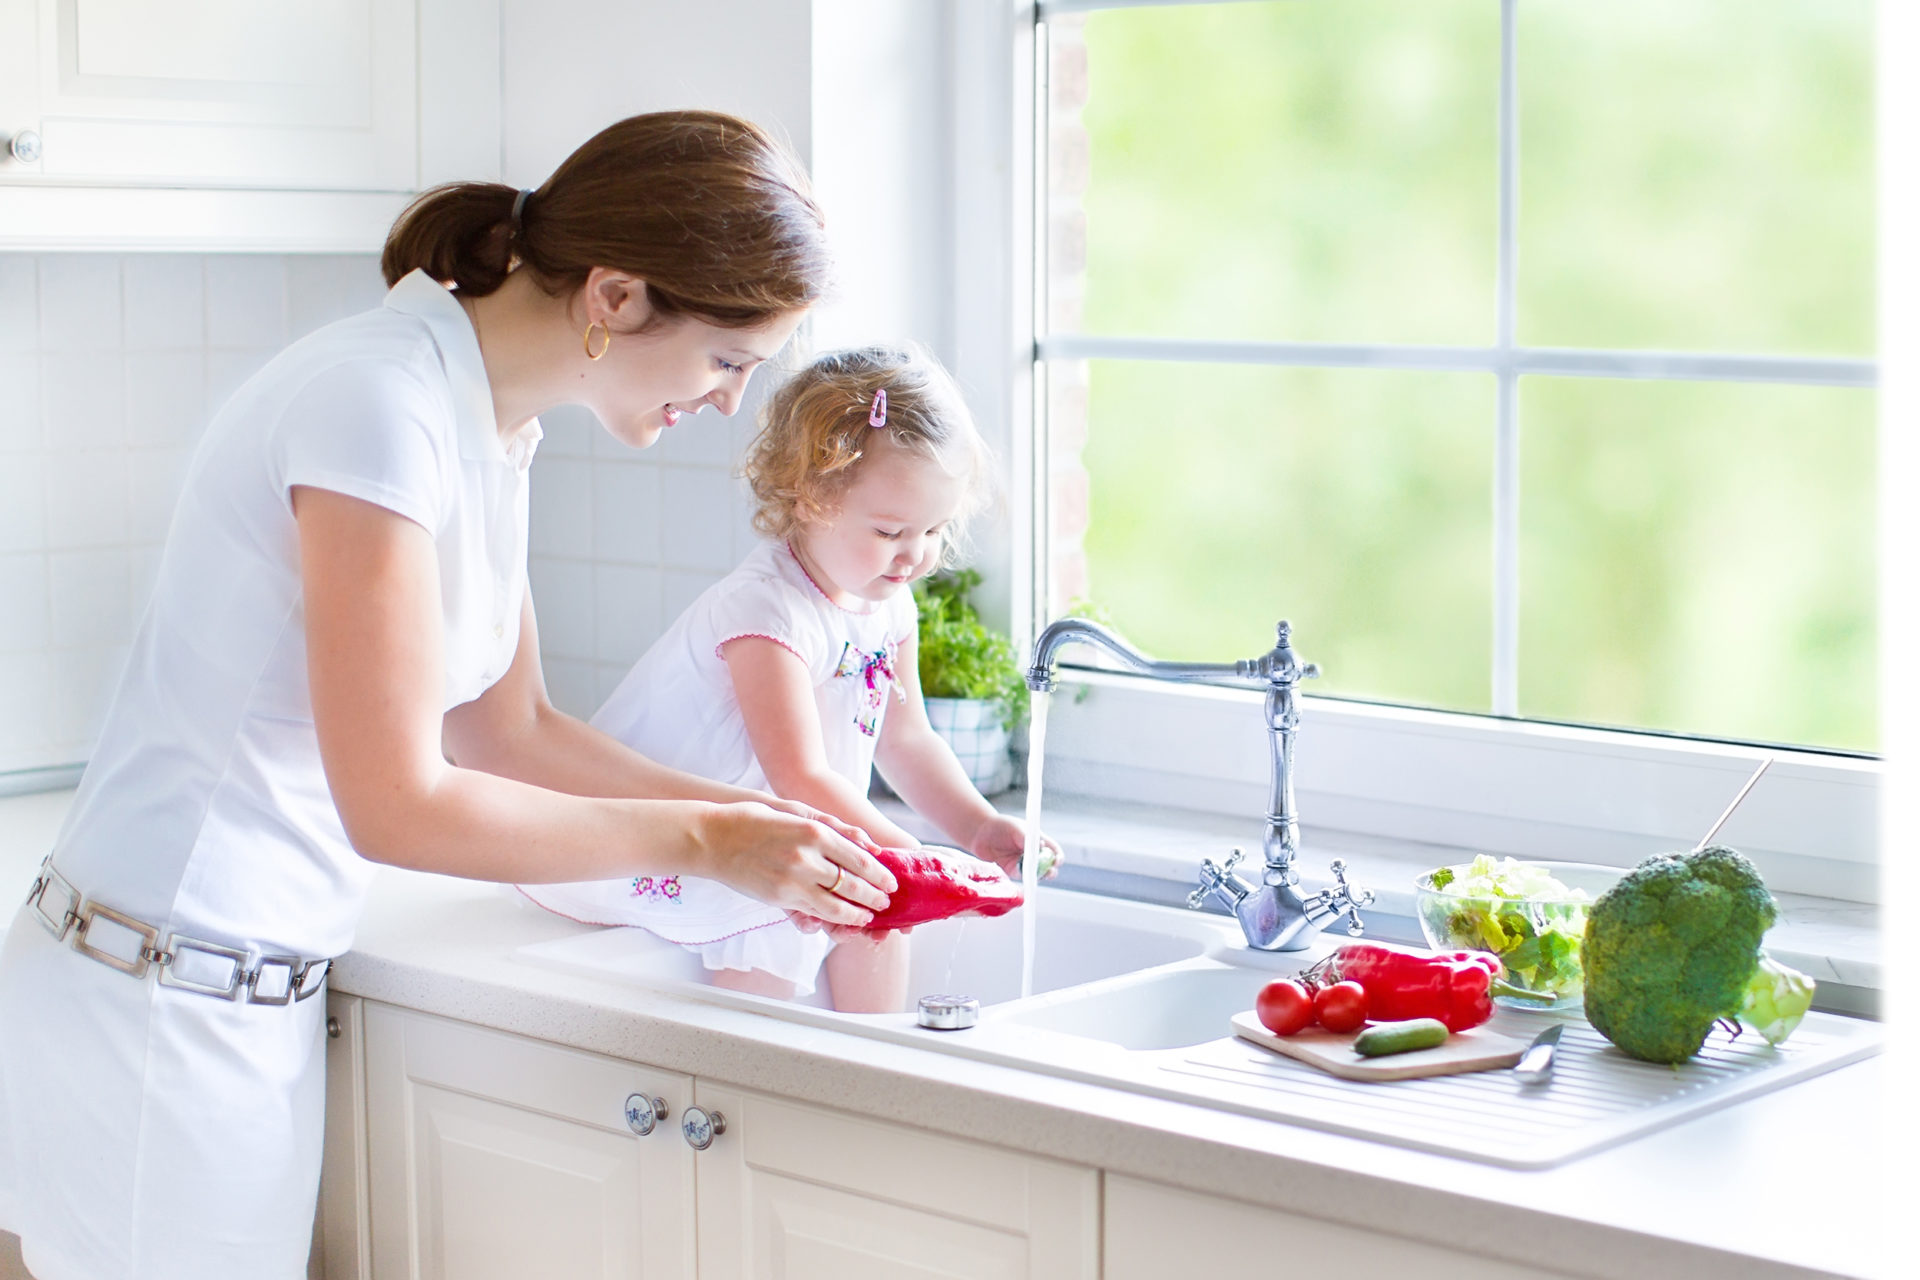 Woman and Child Washing Vegetables in Sink